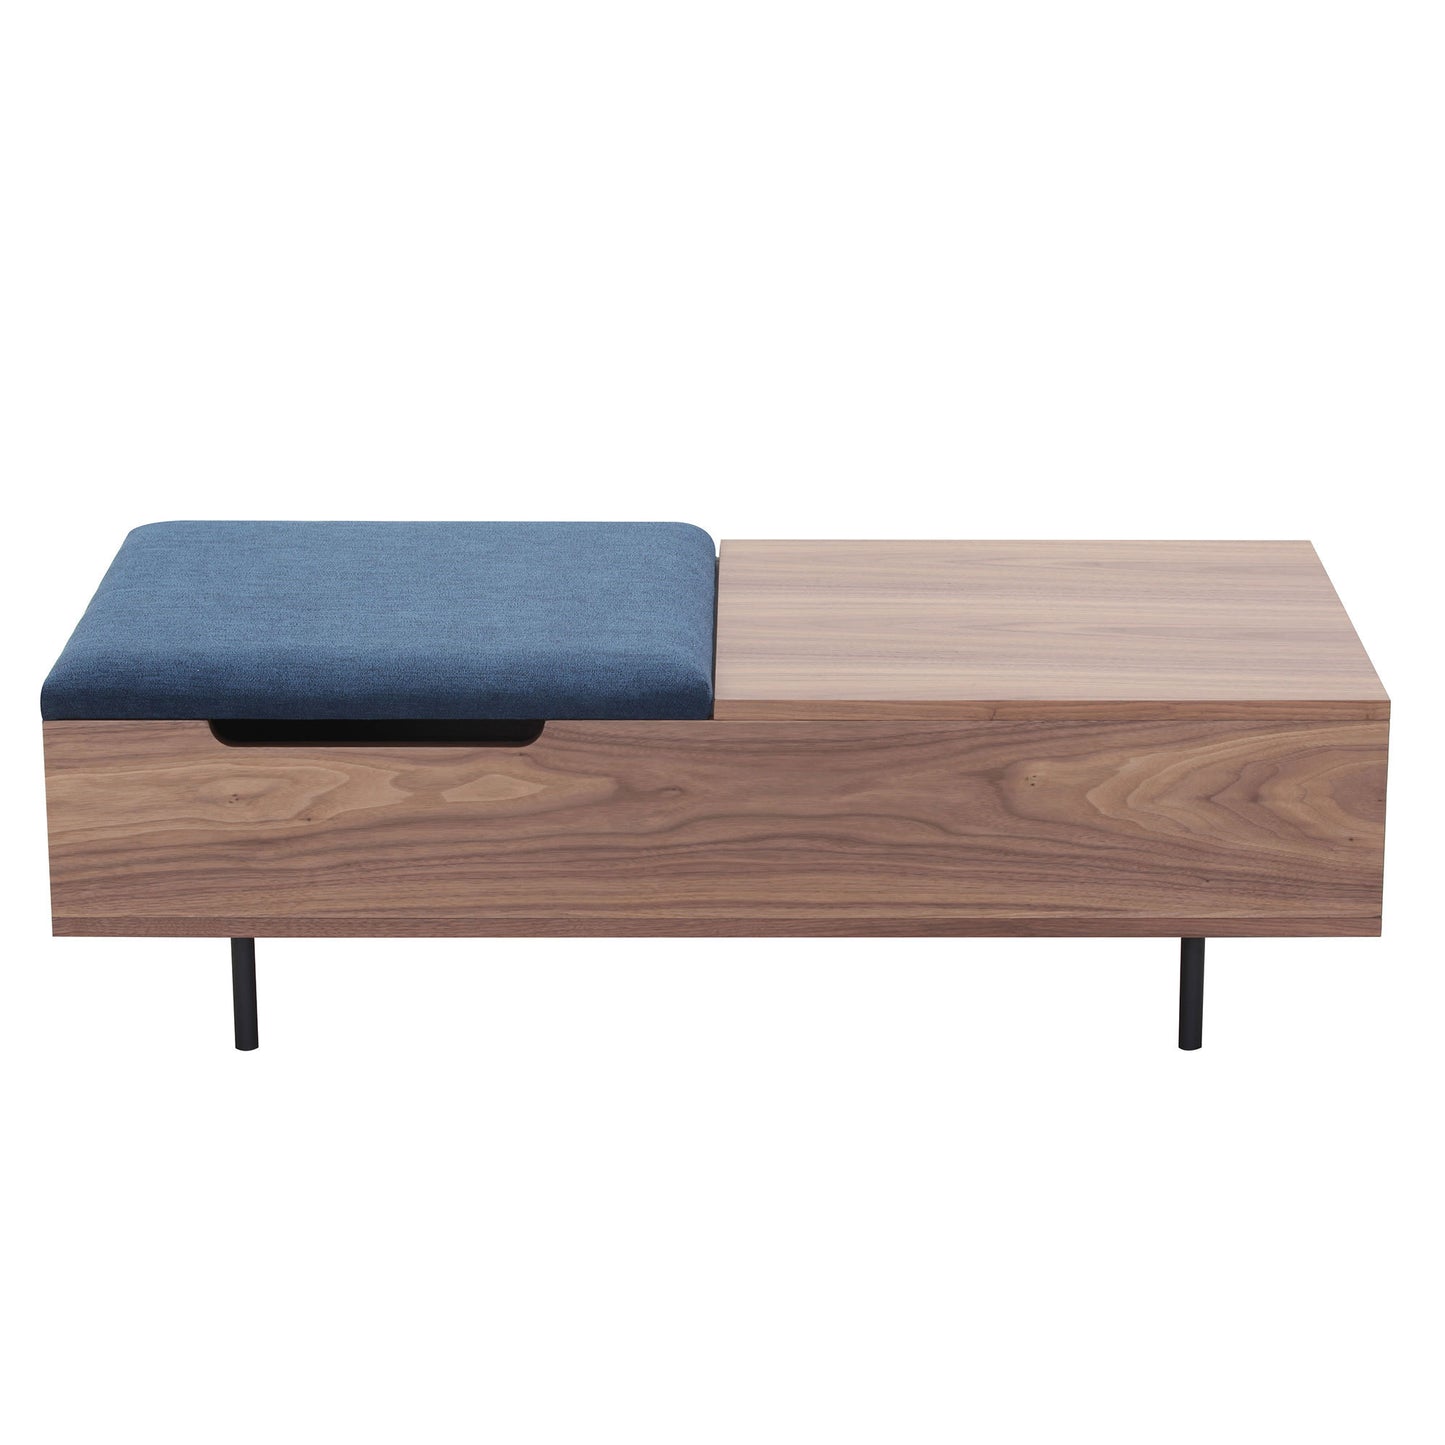 Modern Wood and Metal Coffee Table with Storage for Living Room - Sleek Design, Functional and Stylish - Available in Various Colors and Sizes